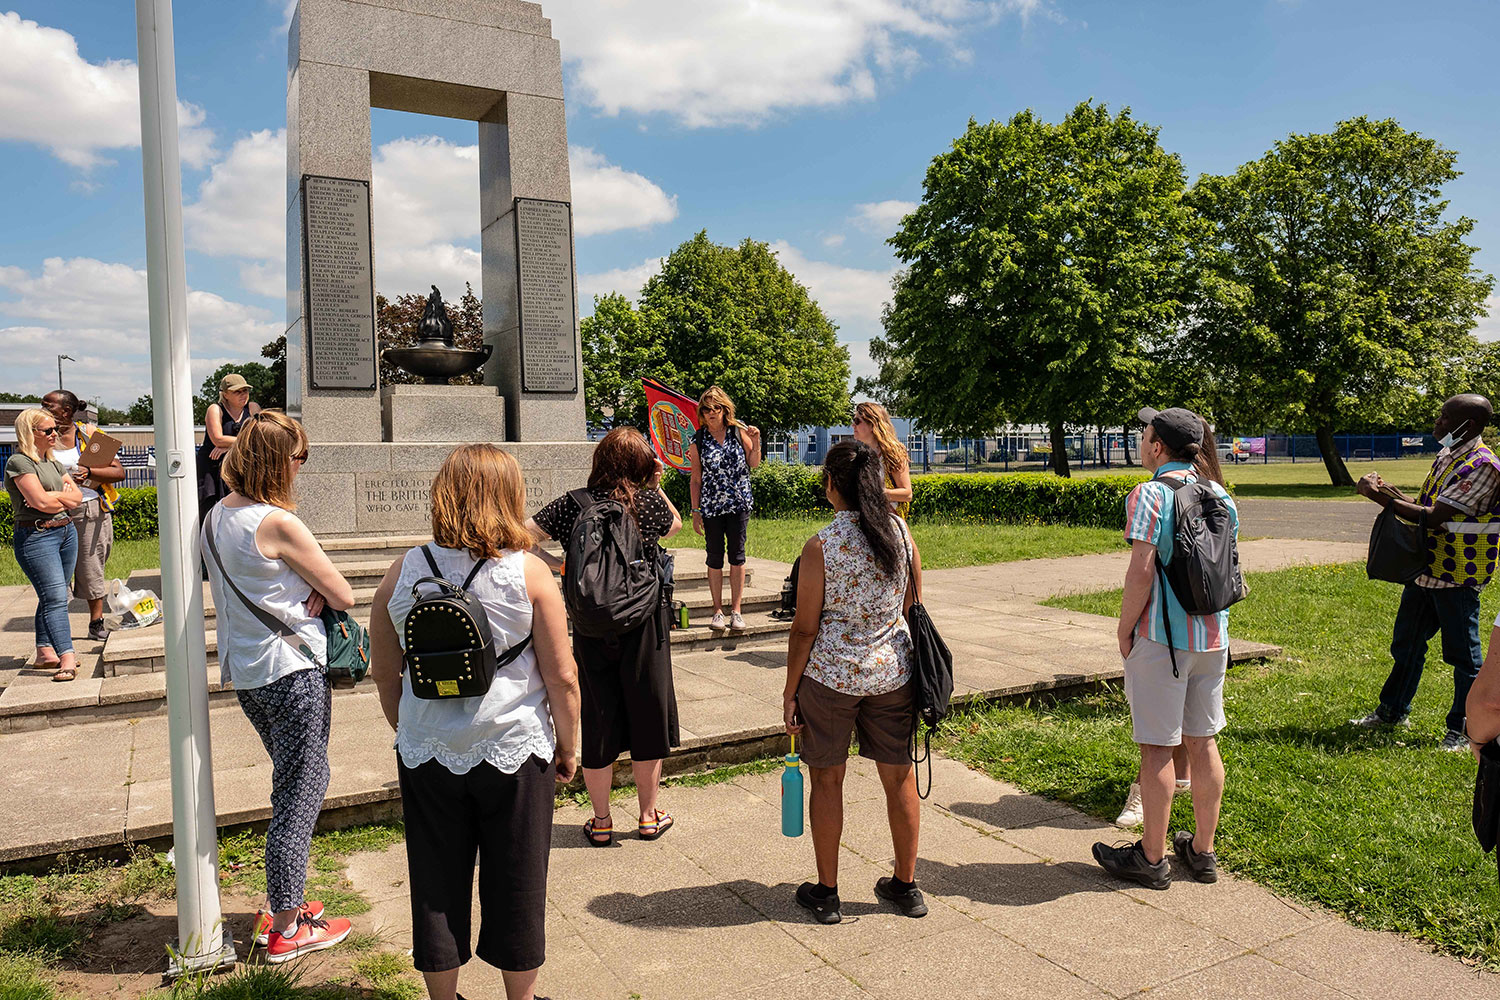 Walkers stop at the large stone Bata war memorial to listen to Ali Pretty